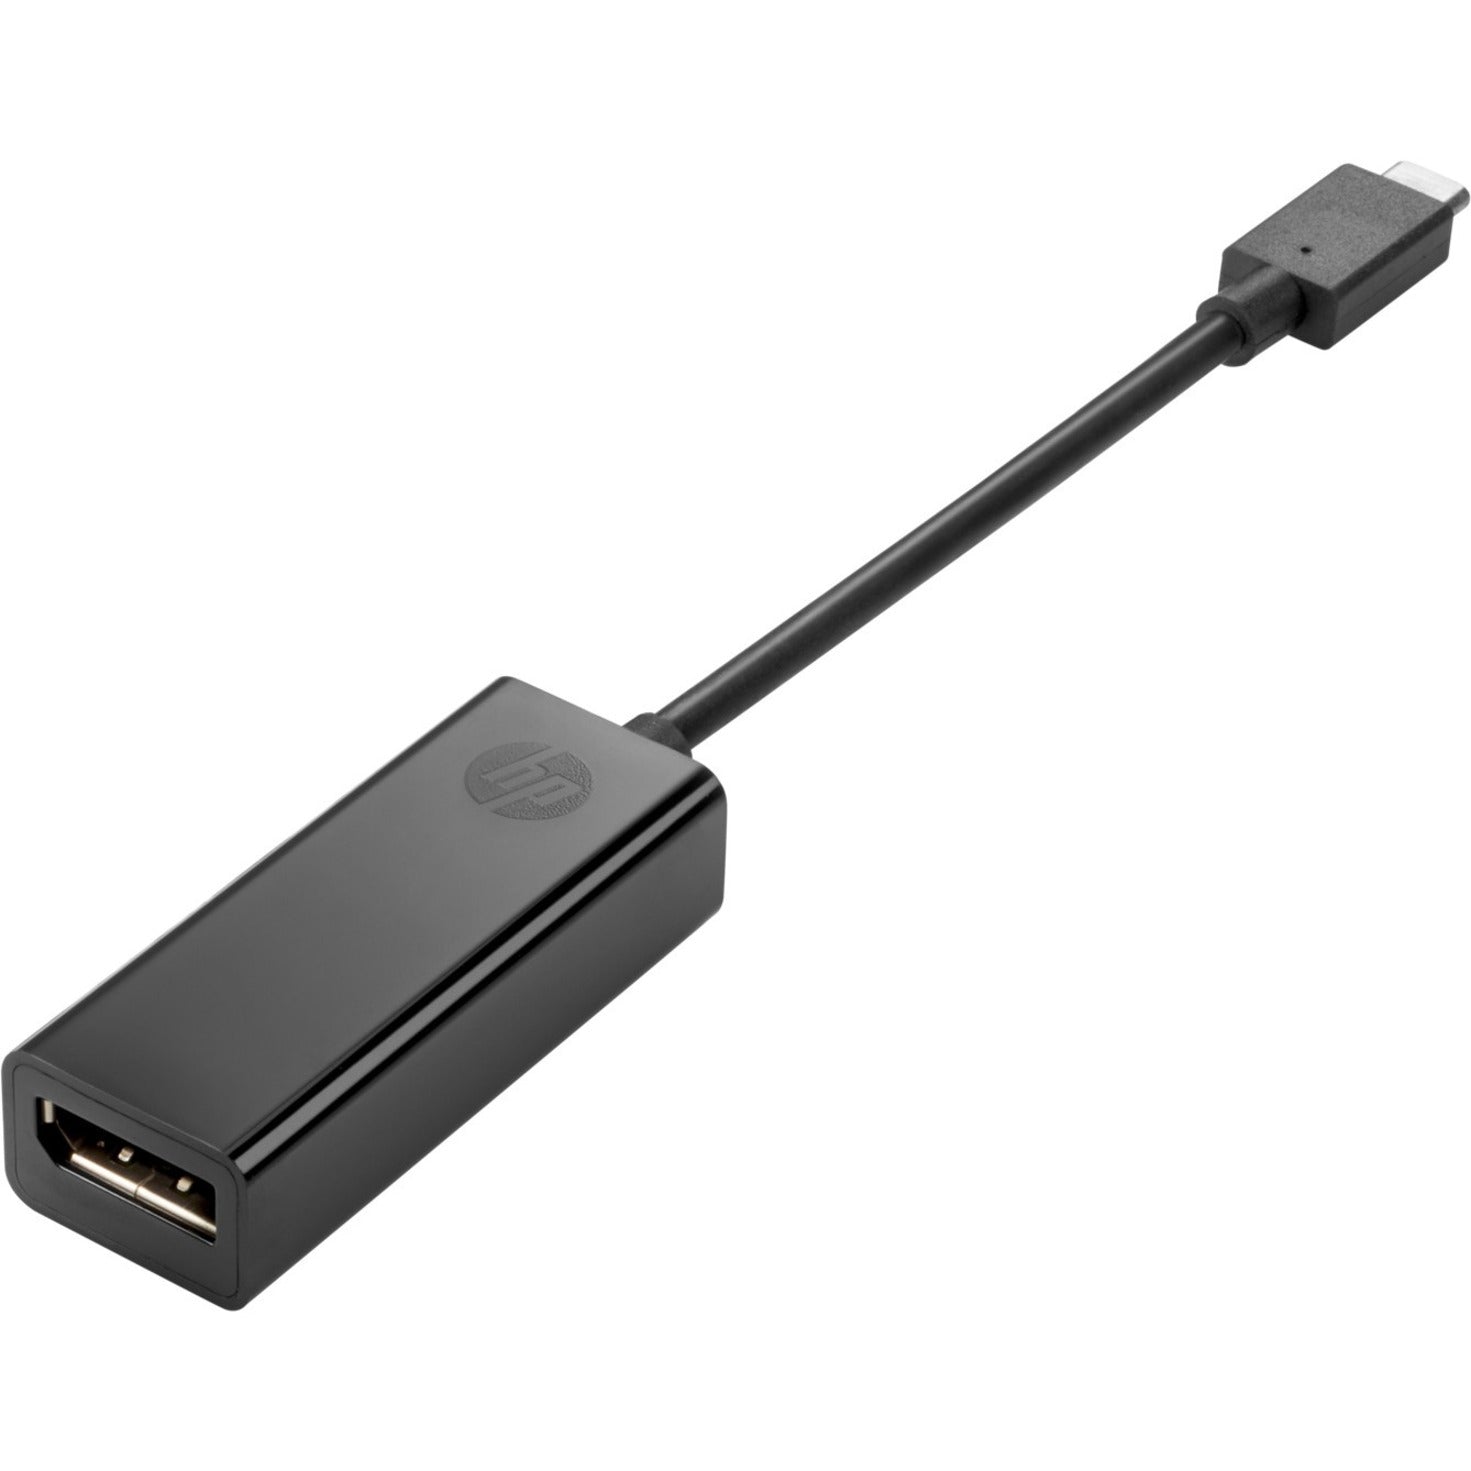 HP USB-C to DP Adapter, Connect Your USB-C Device to a DisplayPort Monitor